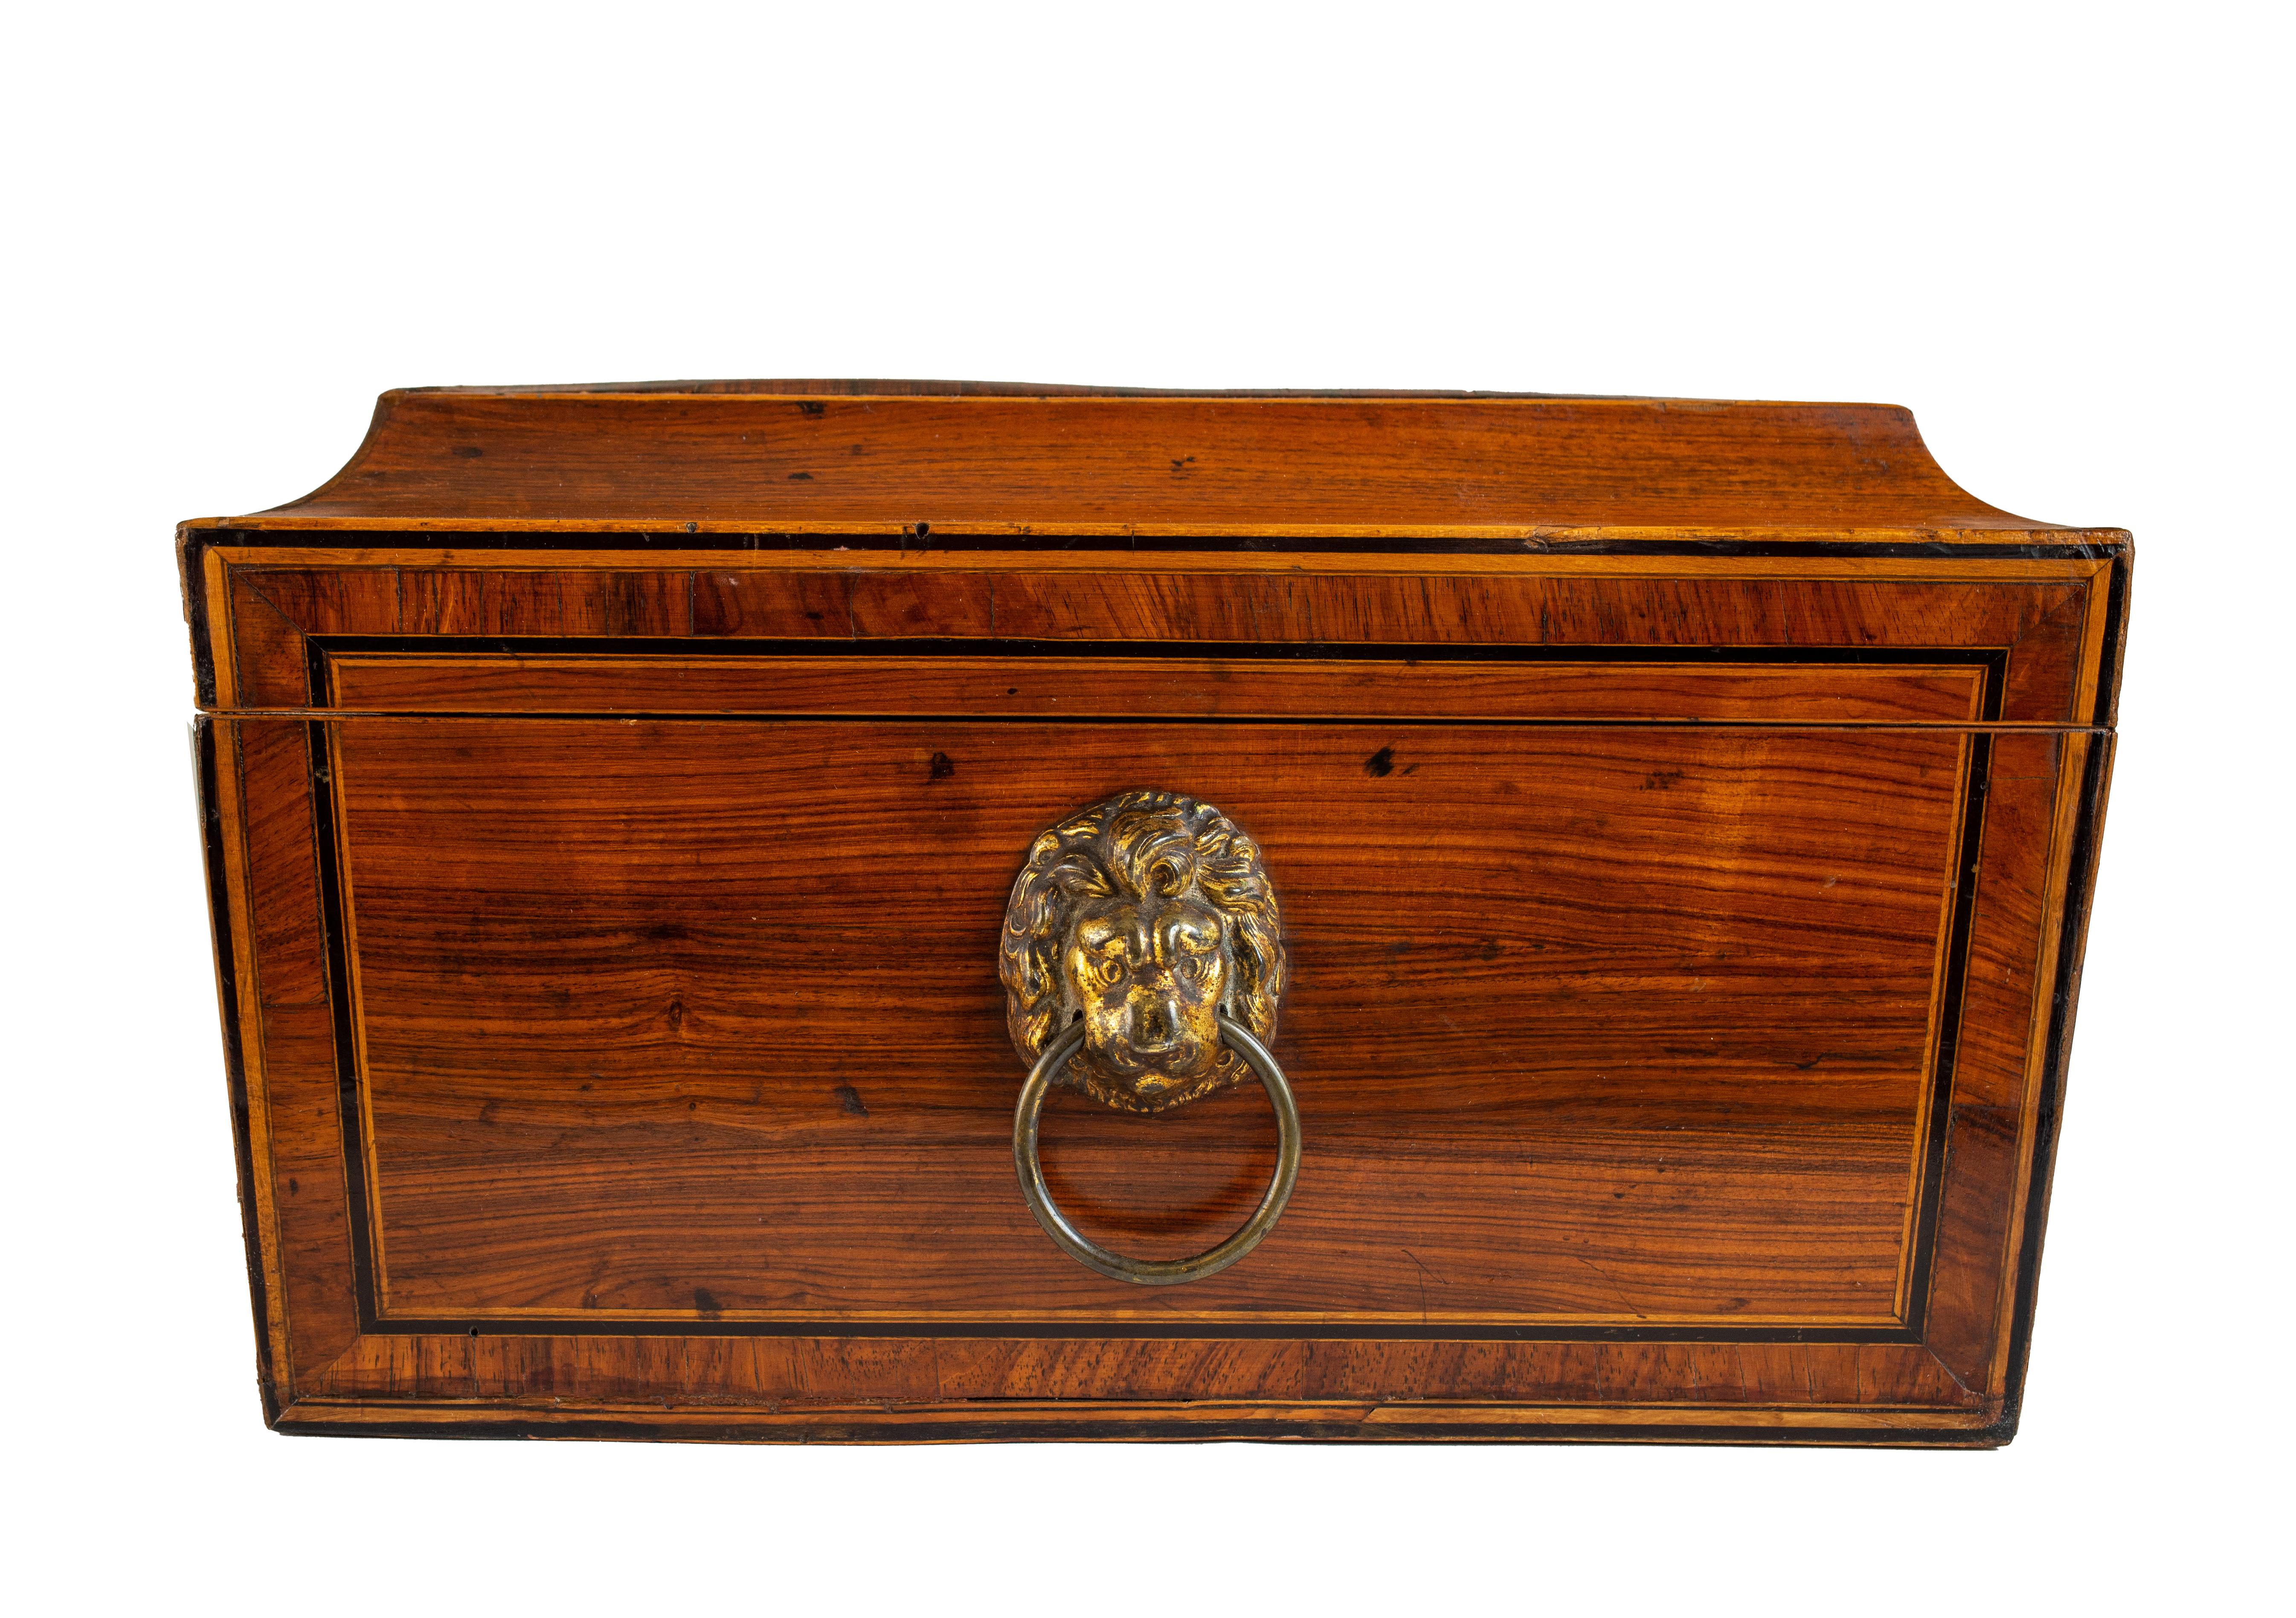 Of rectangular shape, inlaid with boxwood and ebony, with brass lion head handles on each side and a vintage satin-lined interior. With a key.